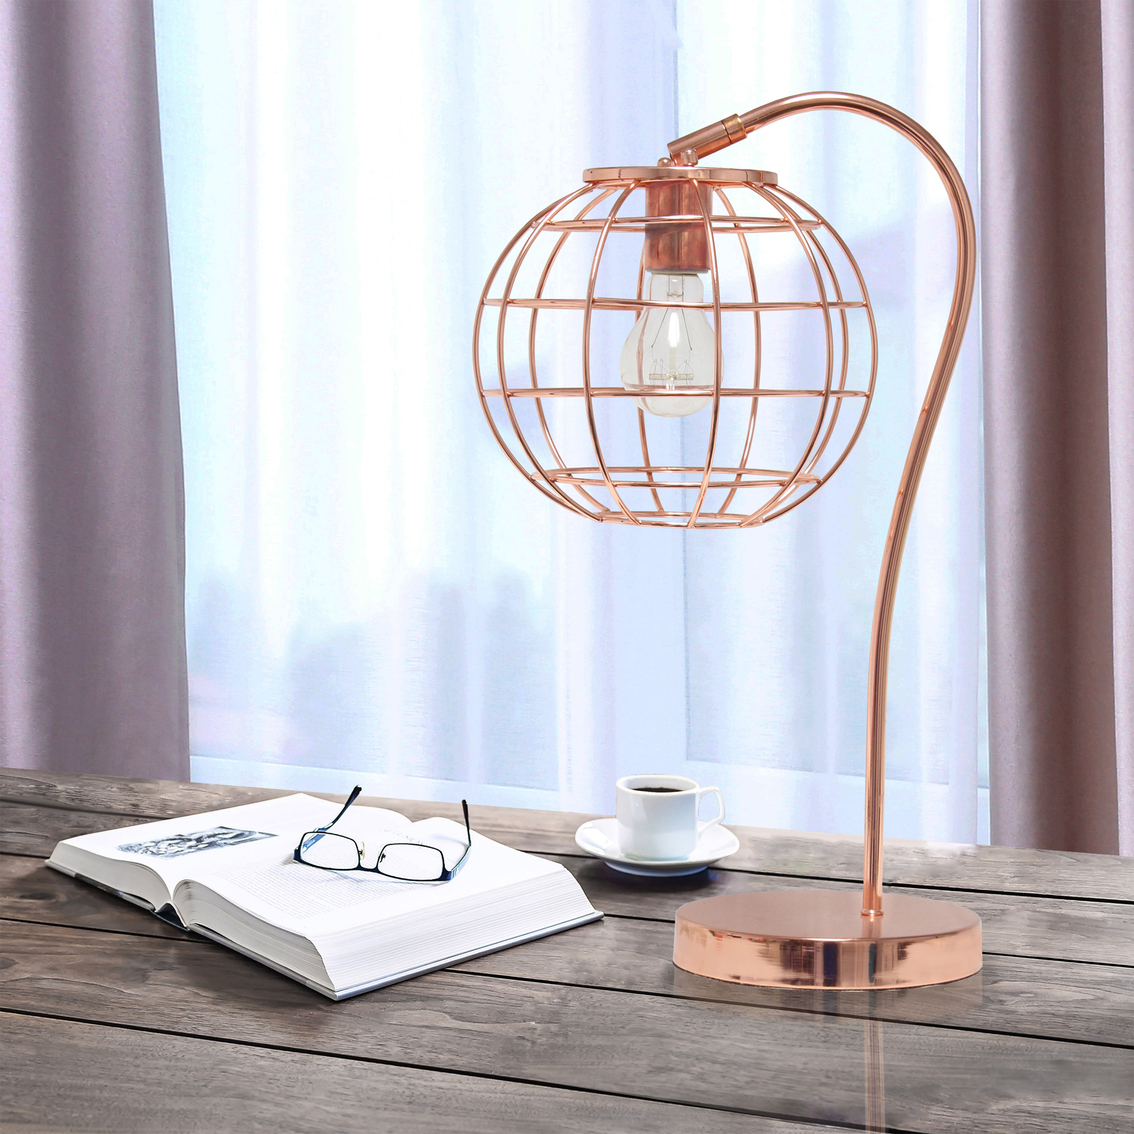 Lalia Home 20 in. Arched Metal Cage Table Lamp - Image 5 of 7